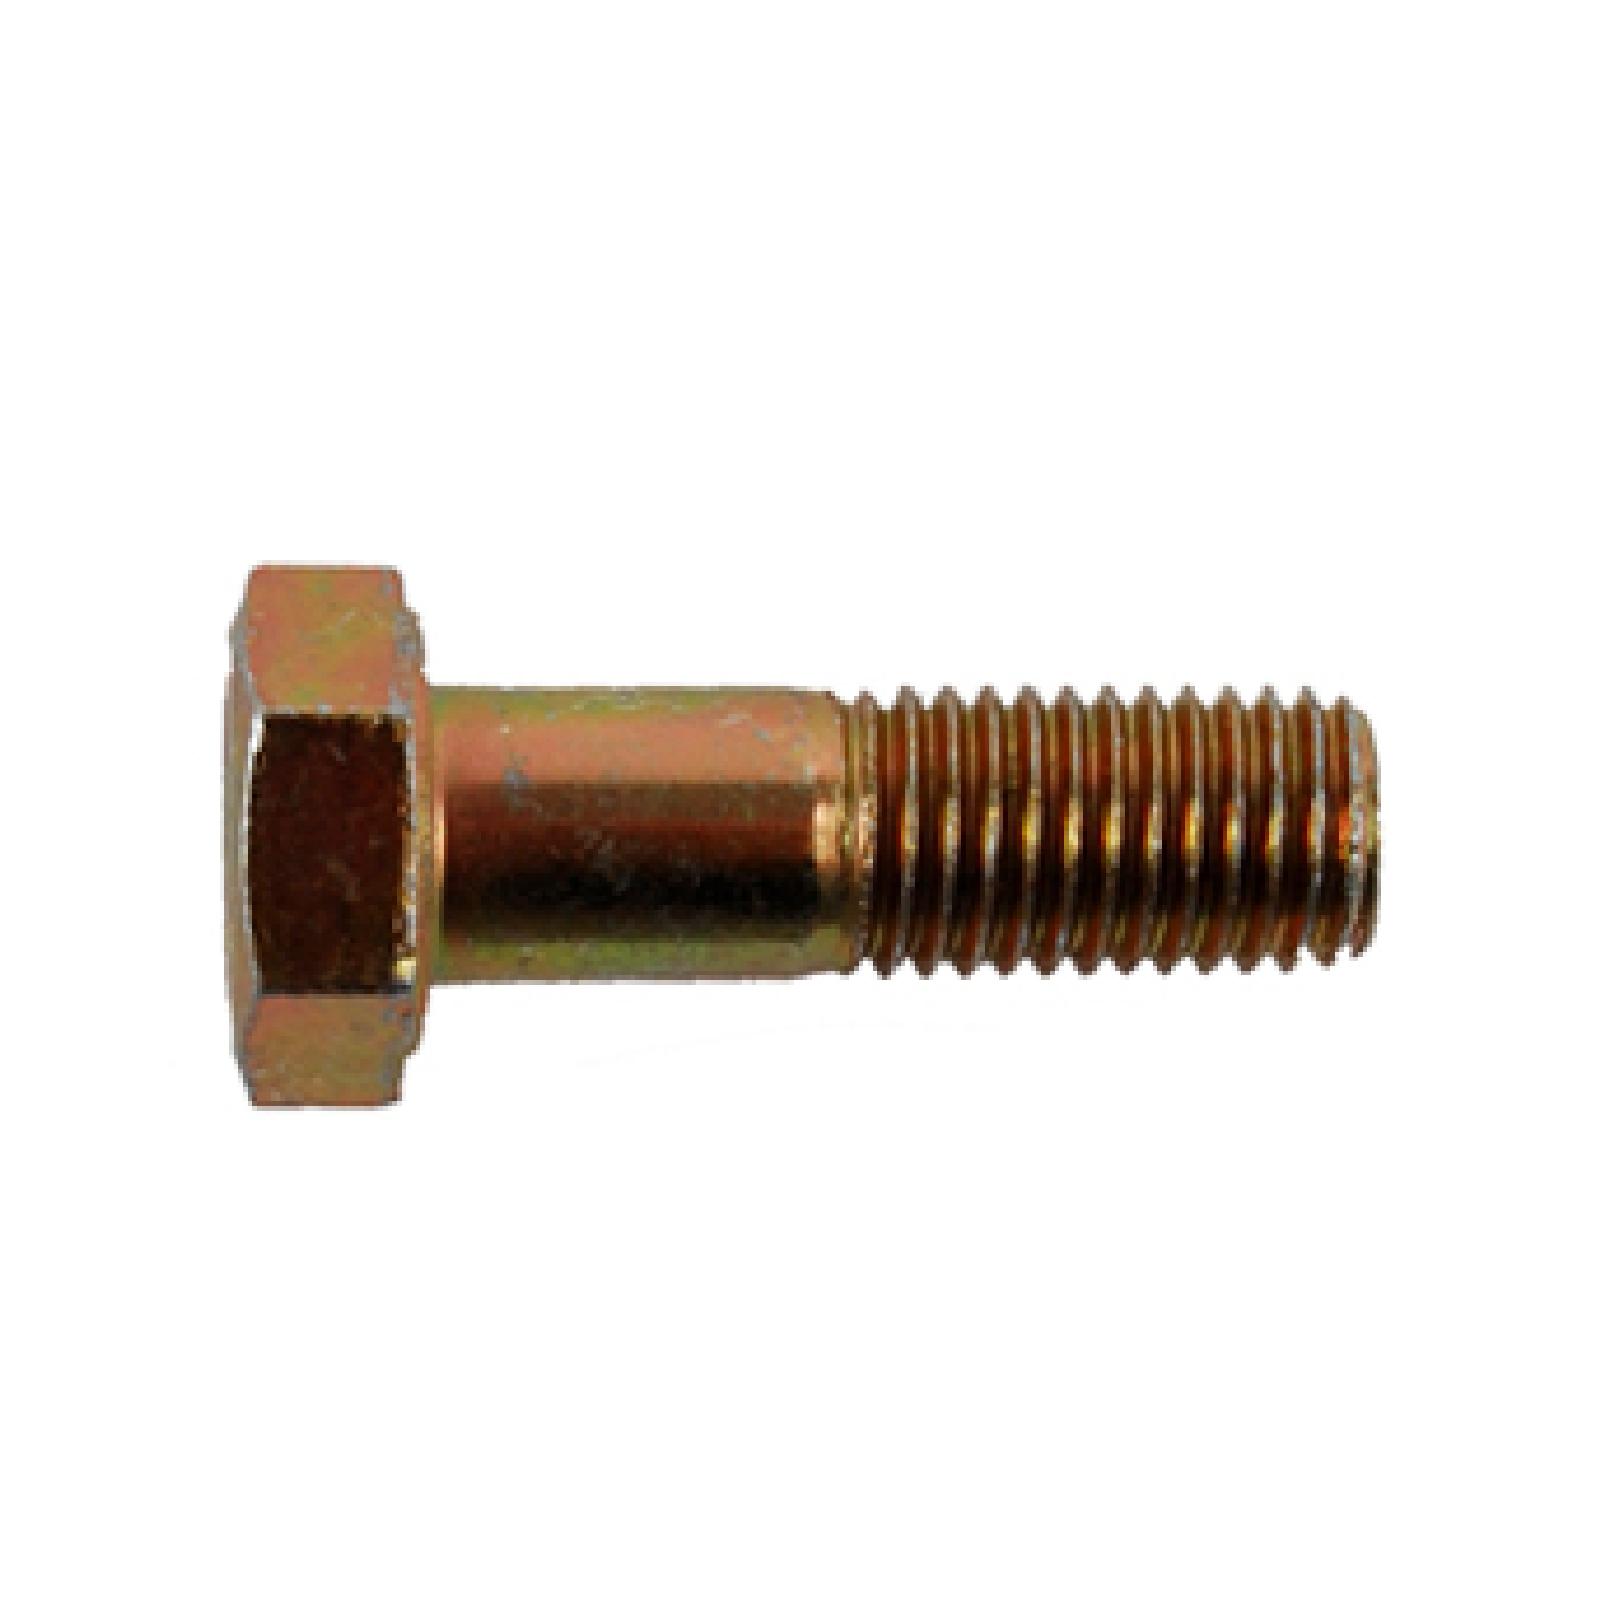 SCREW HEX SPECIAL part# 710-0888 by MTD